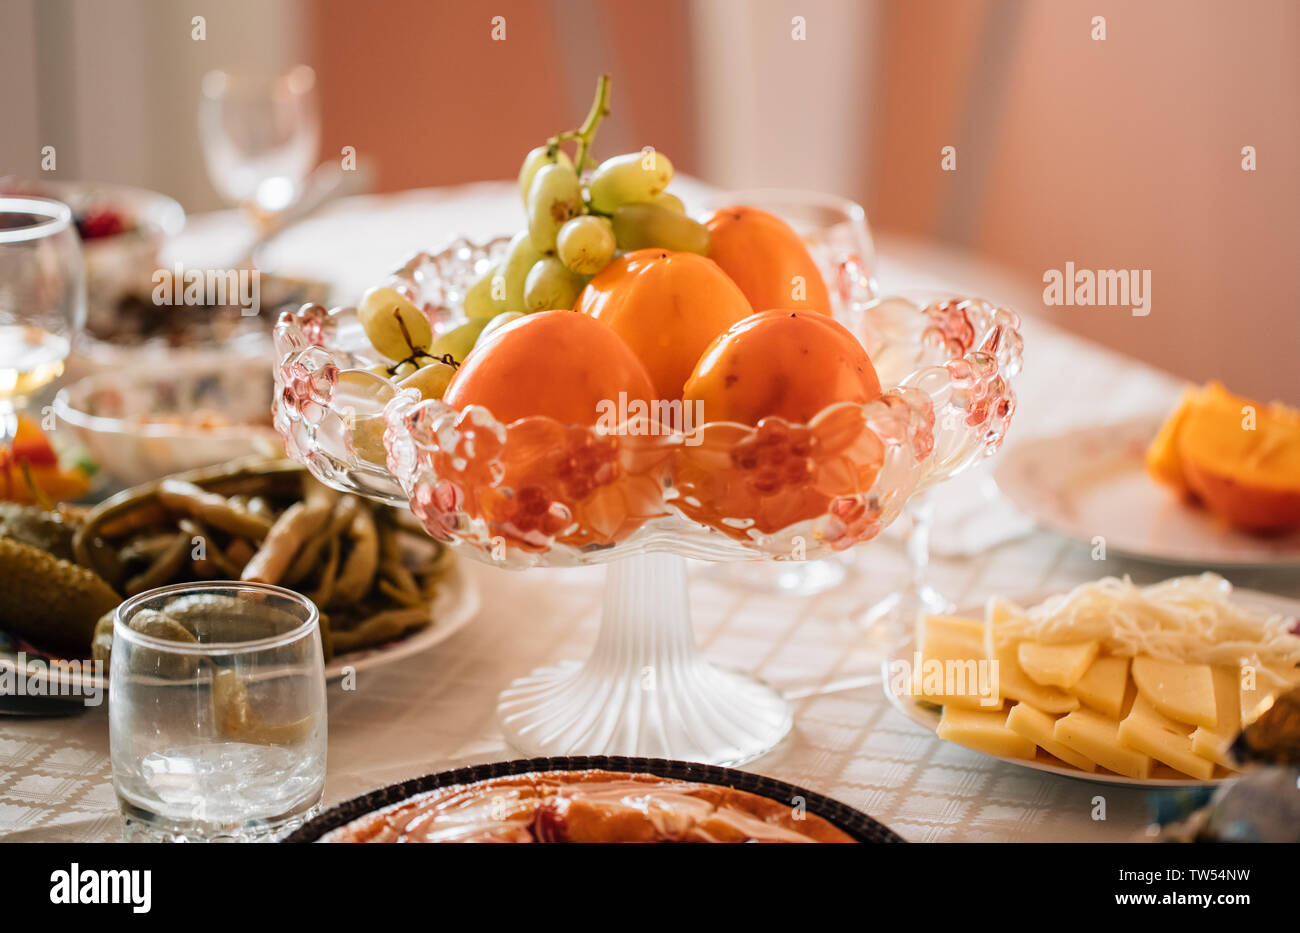 holiday table close-up Stock Photo